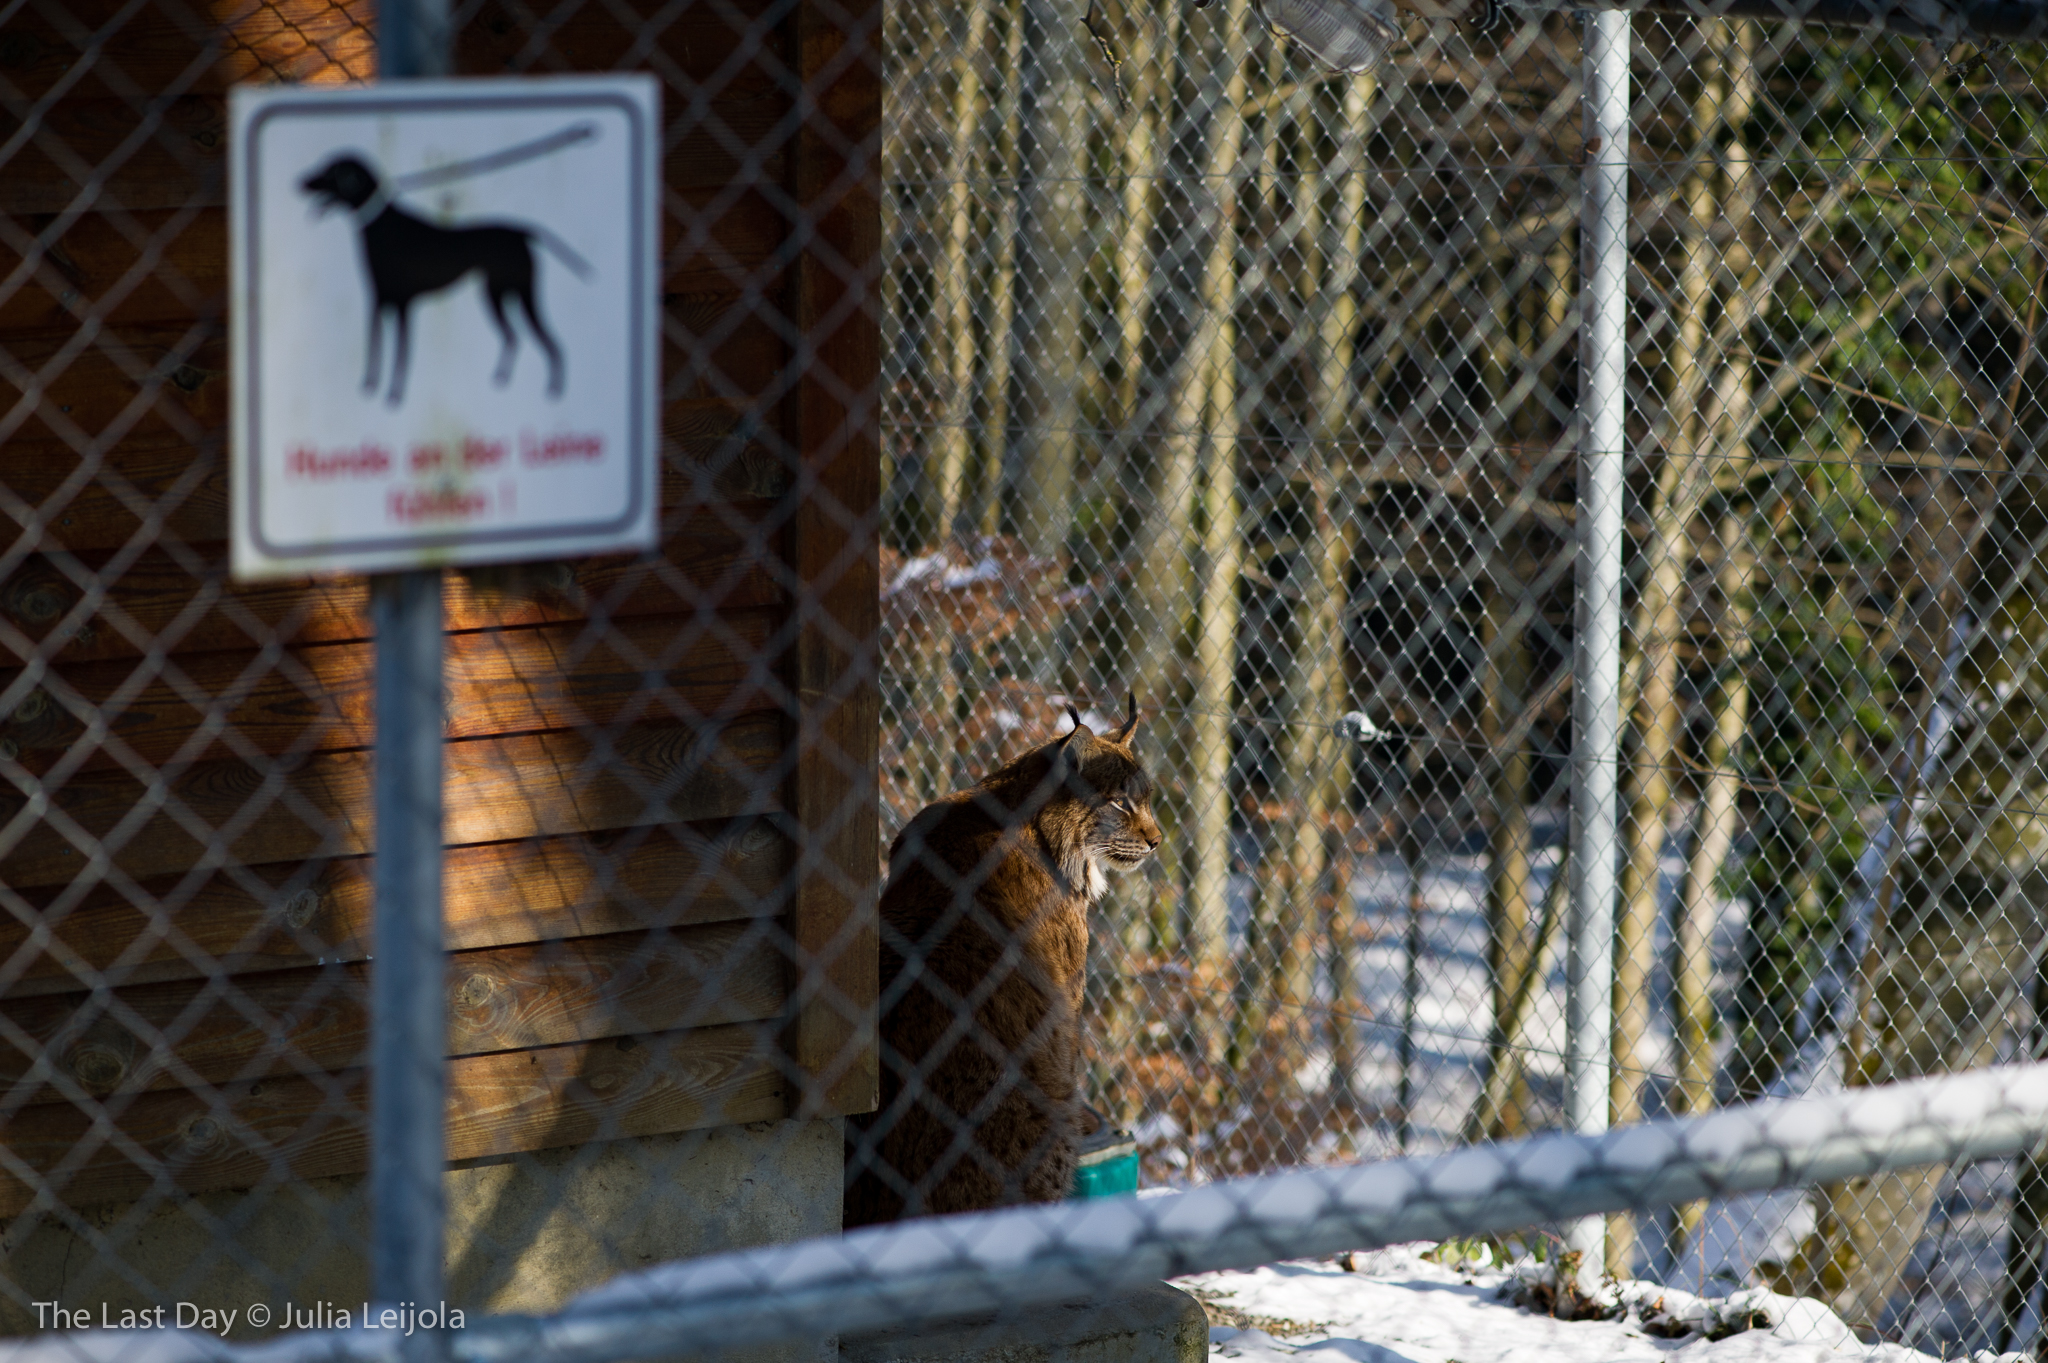 A lynx lynx is sat in a big cage - in the foreground, out of focus, hangs a 'keep your dog on the lead' sign.